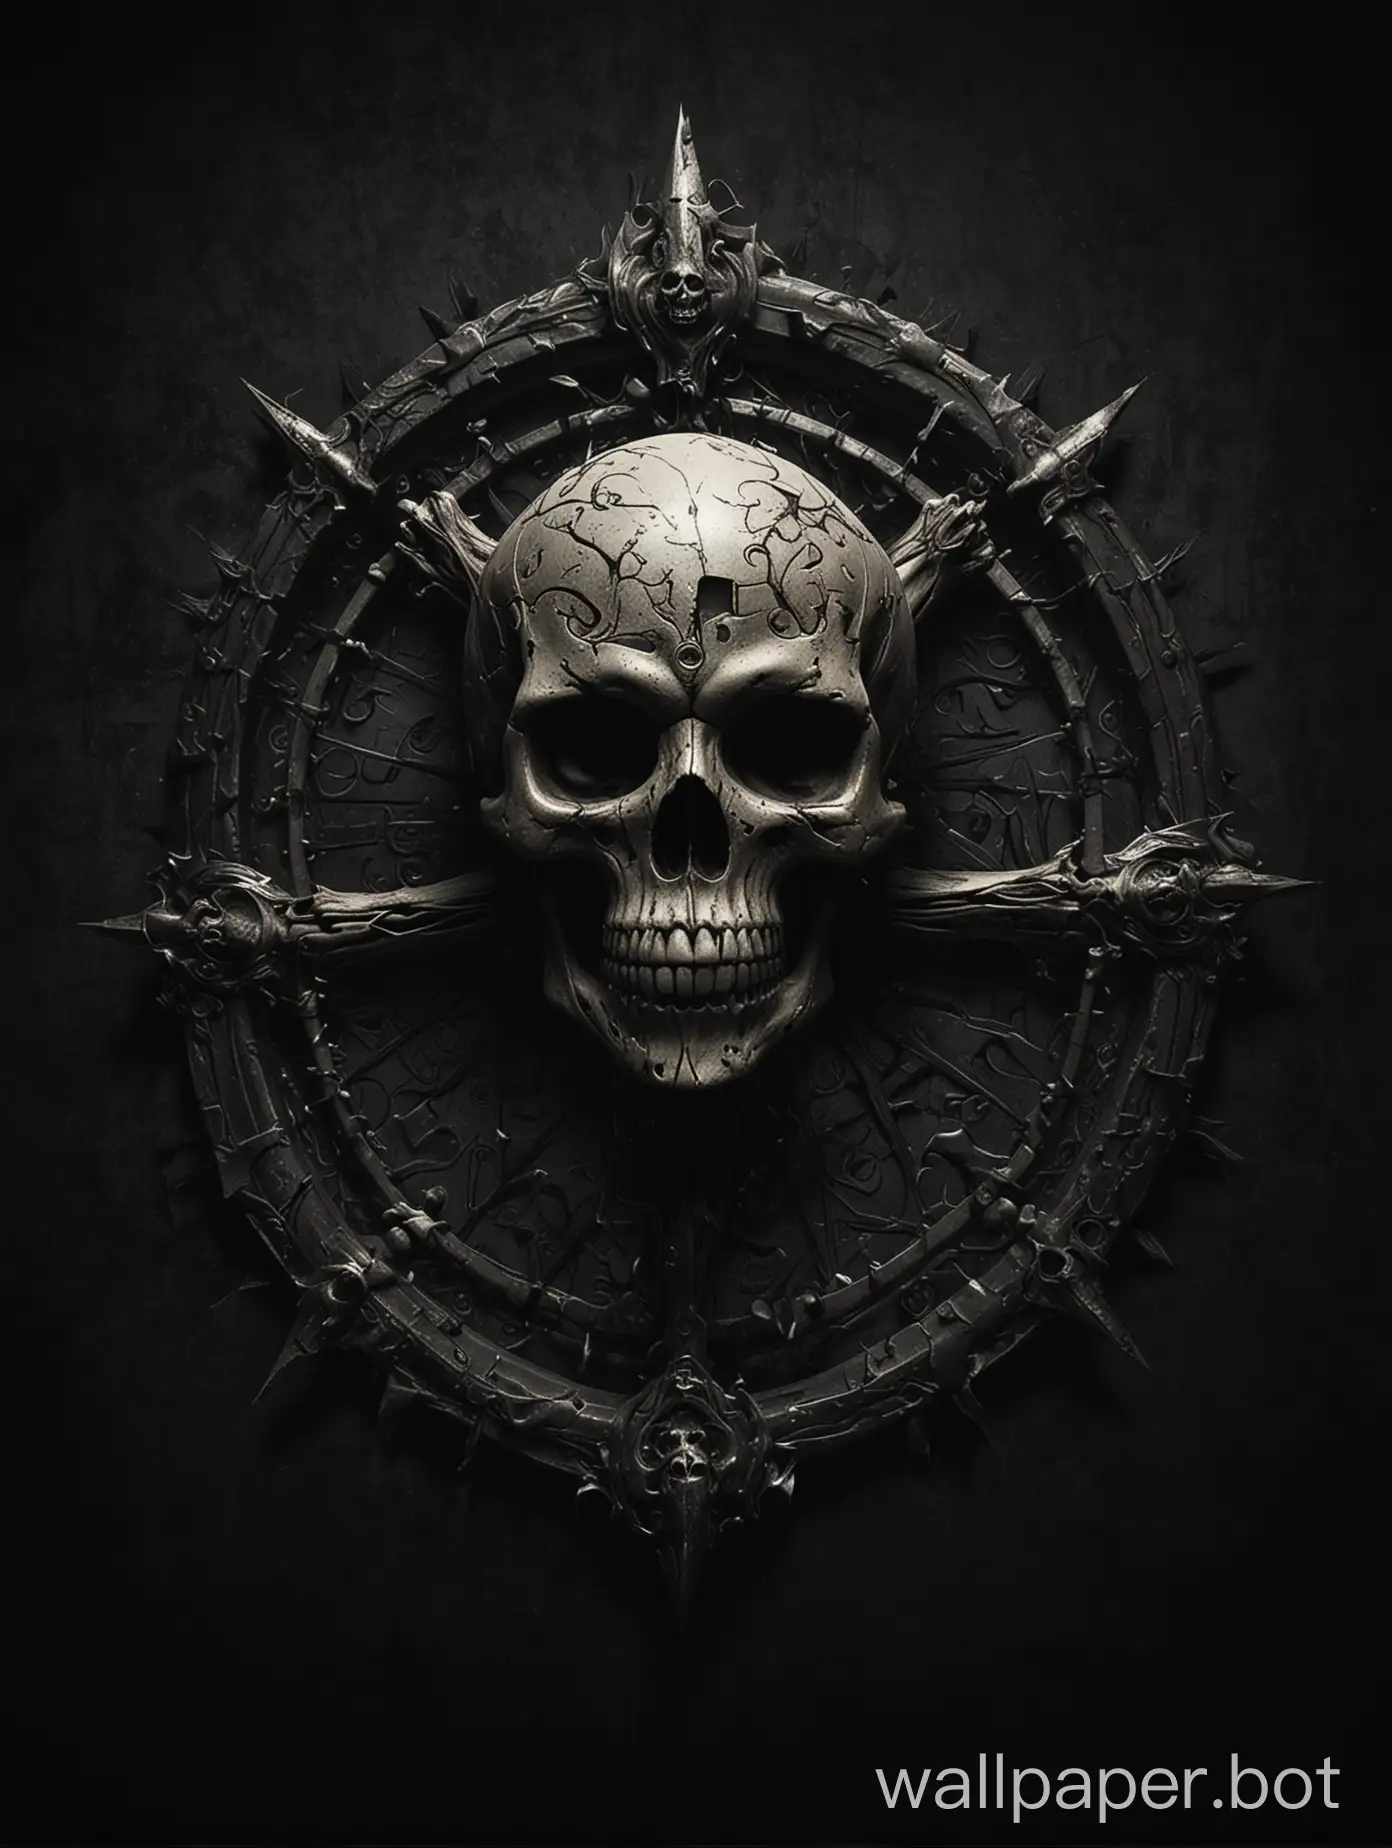 dangerous looking wallpaper, mystic style, dark background, skull  logo in the middle. no text